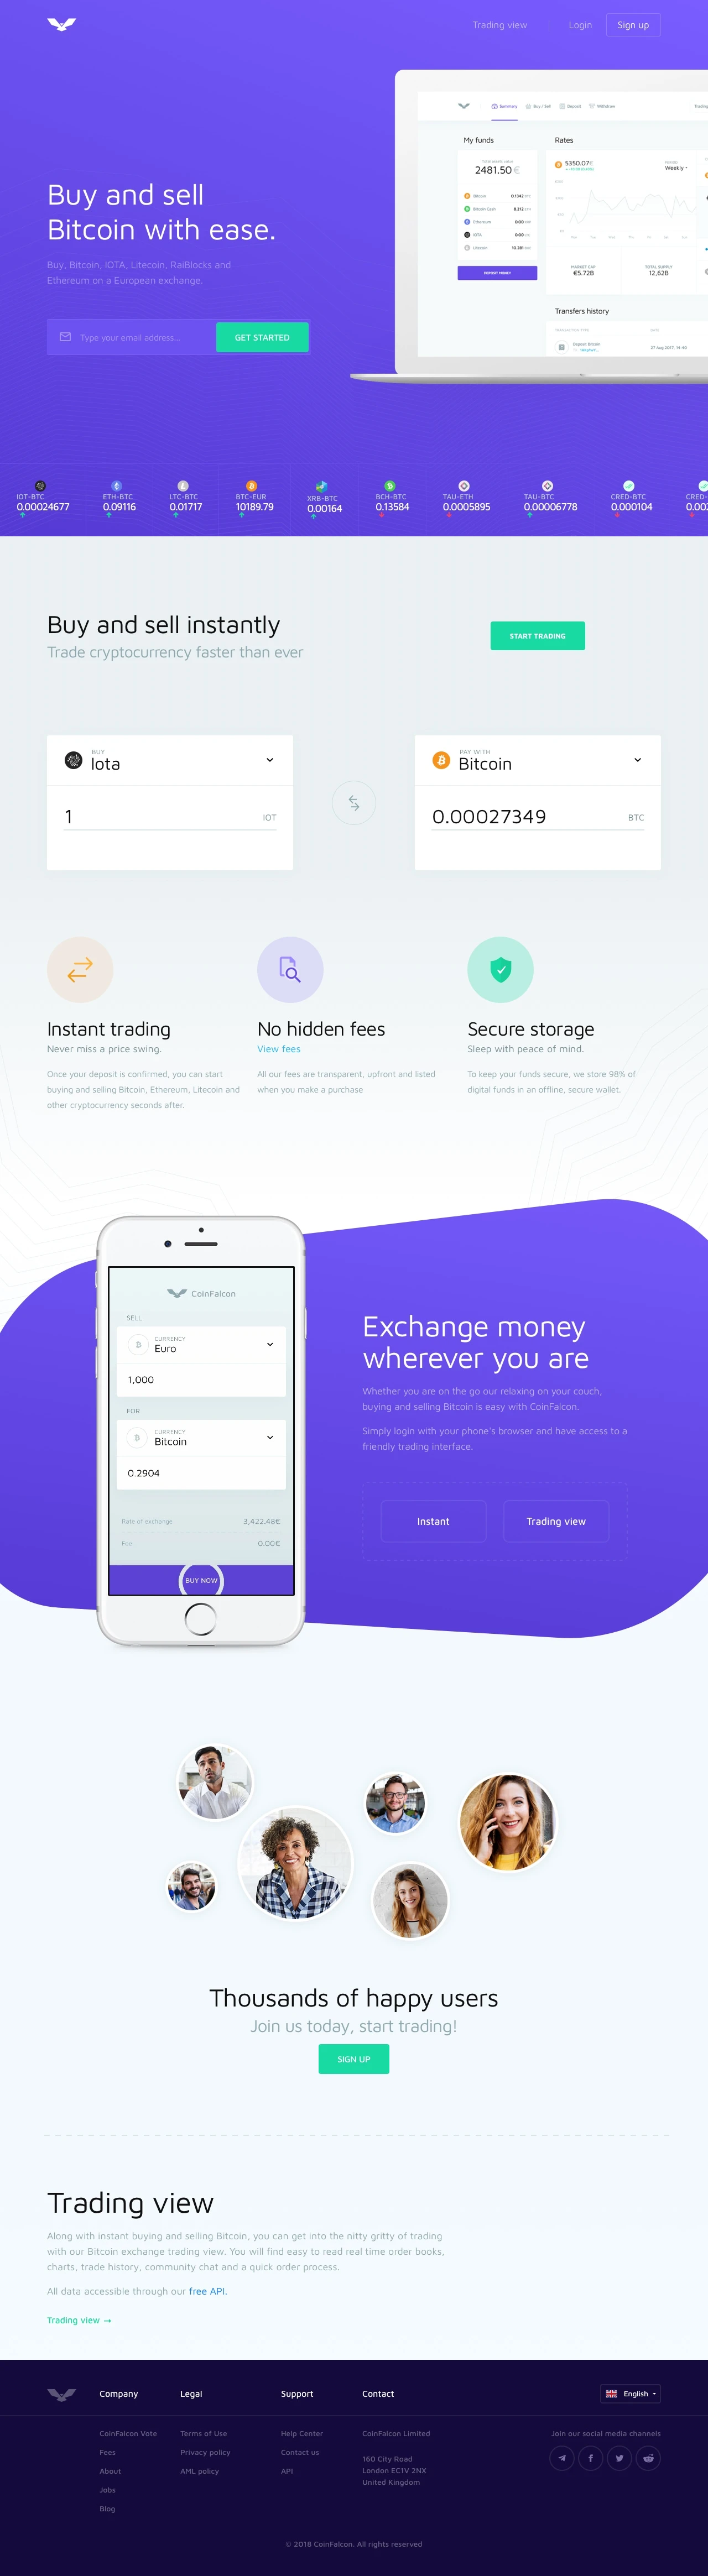 CoinFalcon Landing Page Example: Buy and sell Bitcoin, IOTA, Litecoin, Ethereum and other cryptocurrency on a trusted European exchange, with ease.u